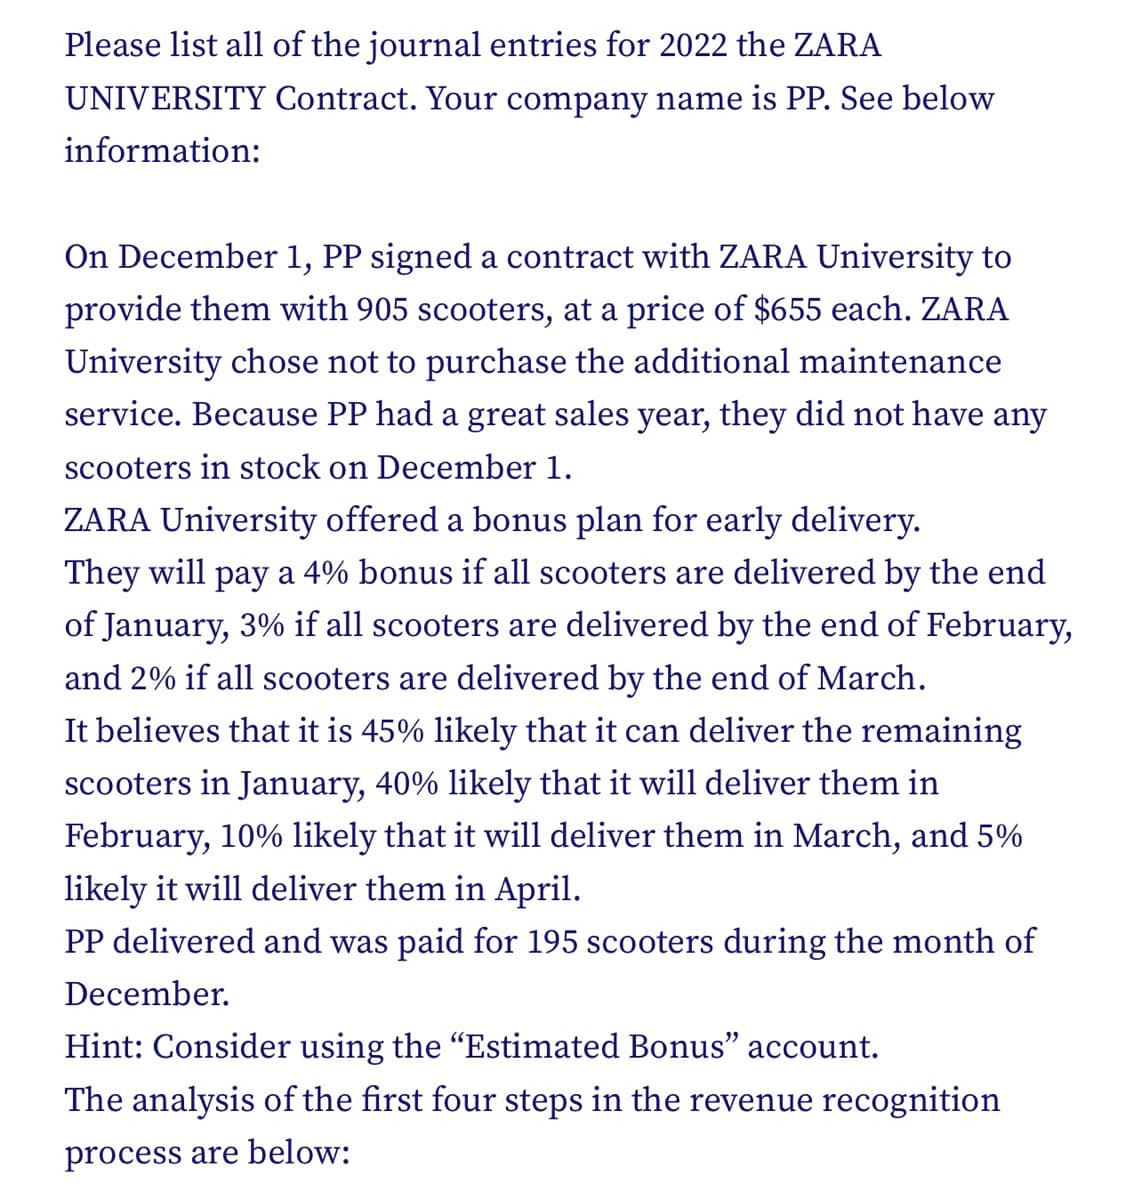 Please list all of the journal entries for 2022 the ZARA
UNIVERSITY Contract. Your company name is PP. See below
information:
On December 1, PP signed a contract with ZARA University to
provide them with 905 scooters, at a price of $655 each. ZARA
University chose not to purchase the additional maintenance
service. Because PP had a great sales year, they did not have any
scooters in stock on December 1.
ZARA University offered a bonus plan for early delivery.
They will pay a 4% bonus if all scooters are delivered by the end
of January, 3% if all scooters are delivered by the end of February,
and 2% if all scooters are delivered by the end of March.
It believes that it is 45% likely that it can deliver the remaining
scooters in January, 40% likely that it will deliver them in
February, 10% likely that it will deliver them in March, and 5%
likely it will deliver them in April.
PP delivered and was paid for 195 scooters during the month of
December.
Hint: Consider using the "Estimated Bonus" account.
The analysis of the first four steps in the revenue recognition
process are below: